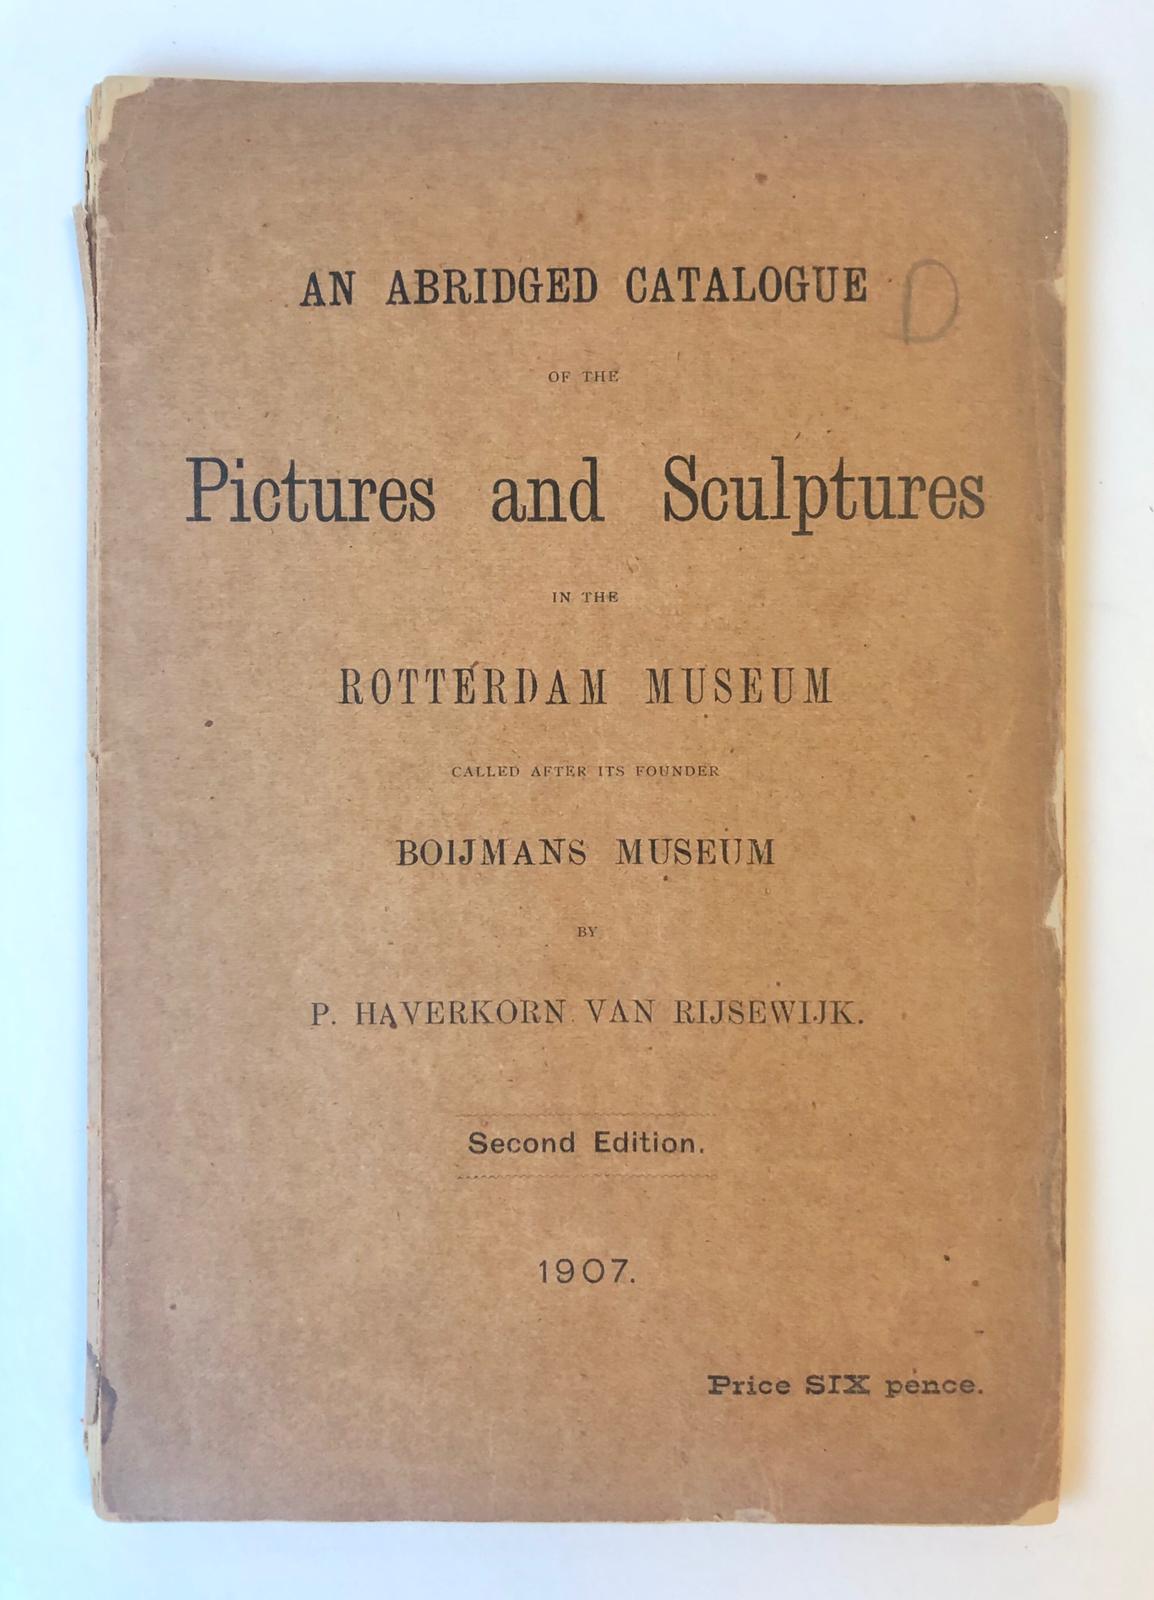 [Rotterdam, Museum Catalogue 1907] An abridged catalogue of the pictures and sculptures in the Rotterdam Museum called after its founder Boijmans Museum, Second edition, 1907, Electric printing-office Nijgh & Van Ditmar, Rotterdam, 72 pp.